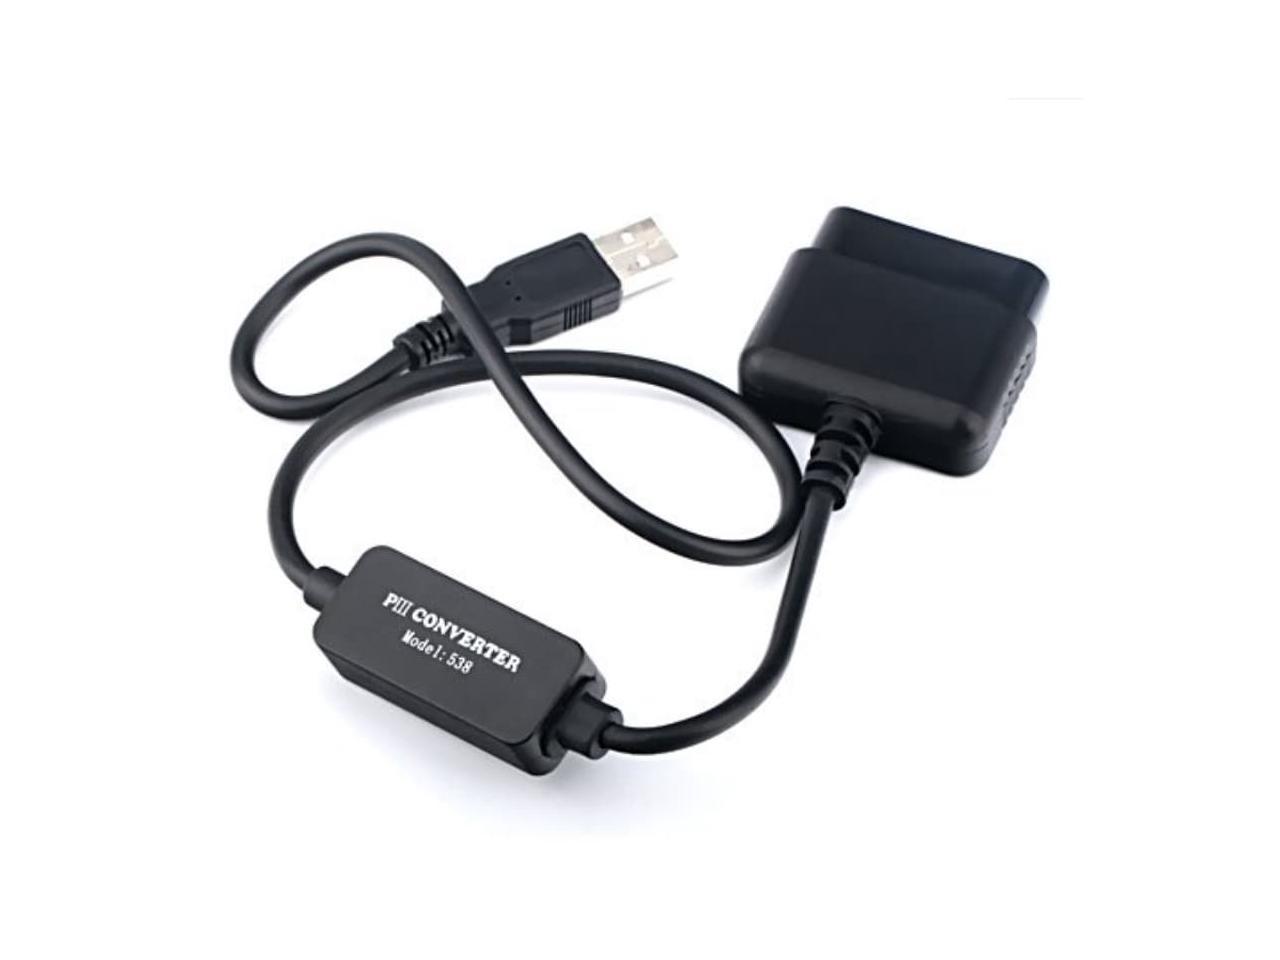 Ps2 Controller To Usb Adapter Windows Pc Or Playstation 3 Converter Cable For Sony Dual Shock 2 Controllers Newegg Com